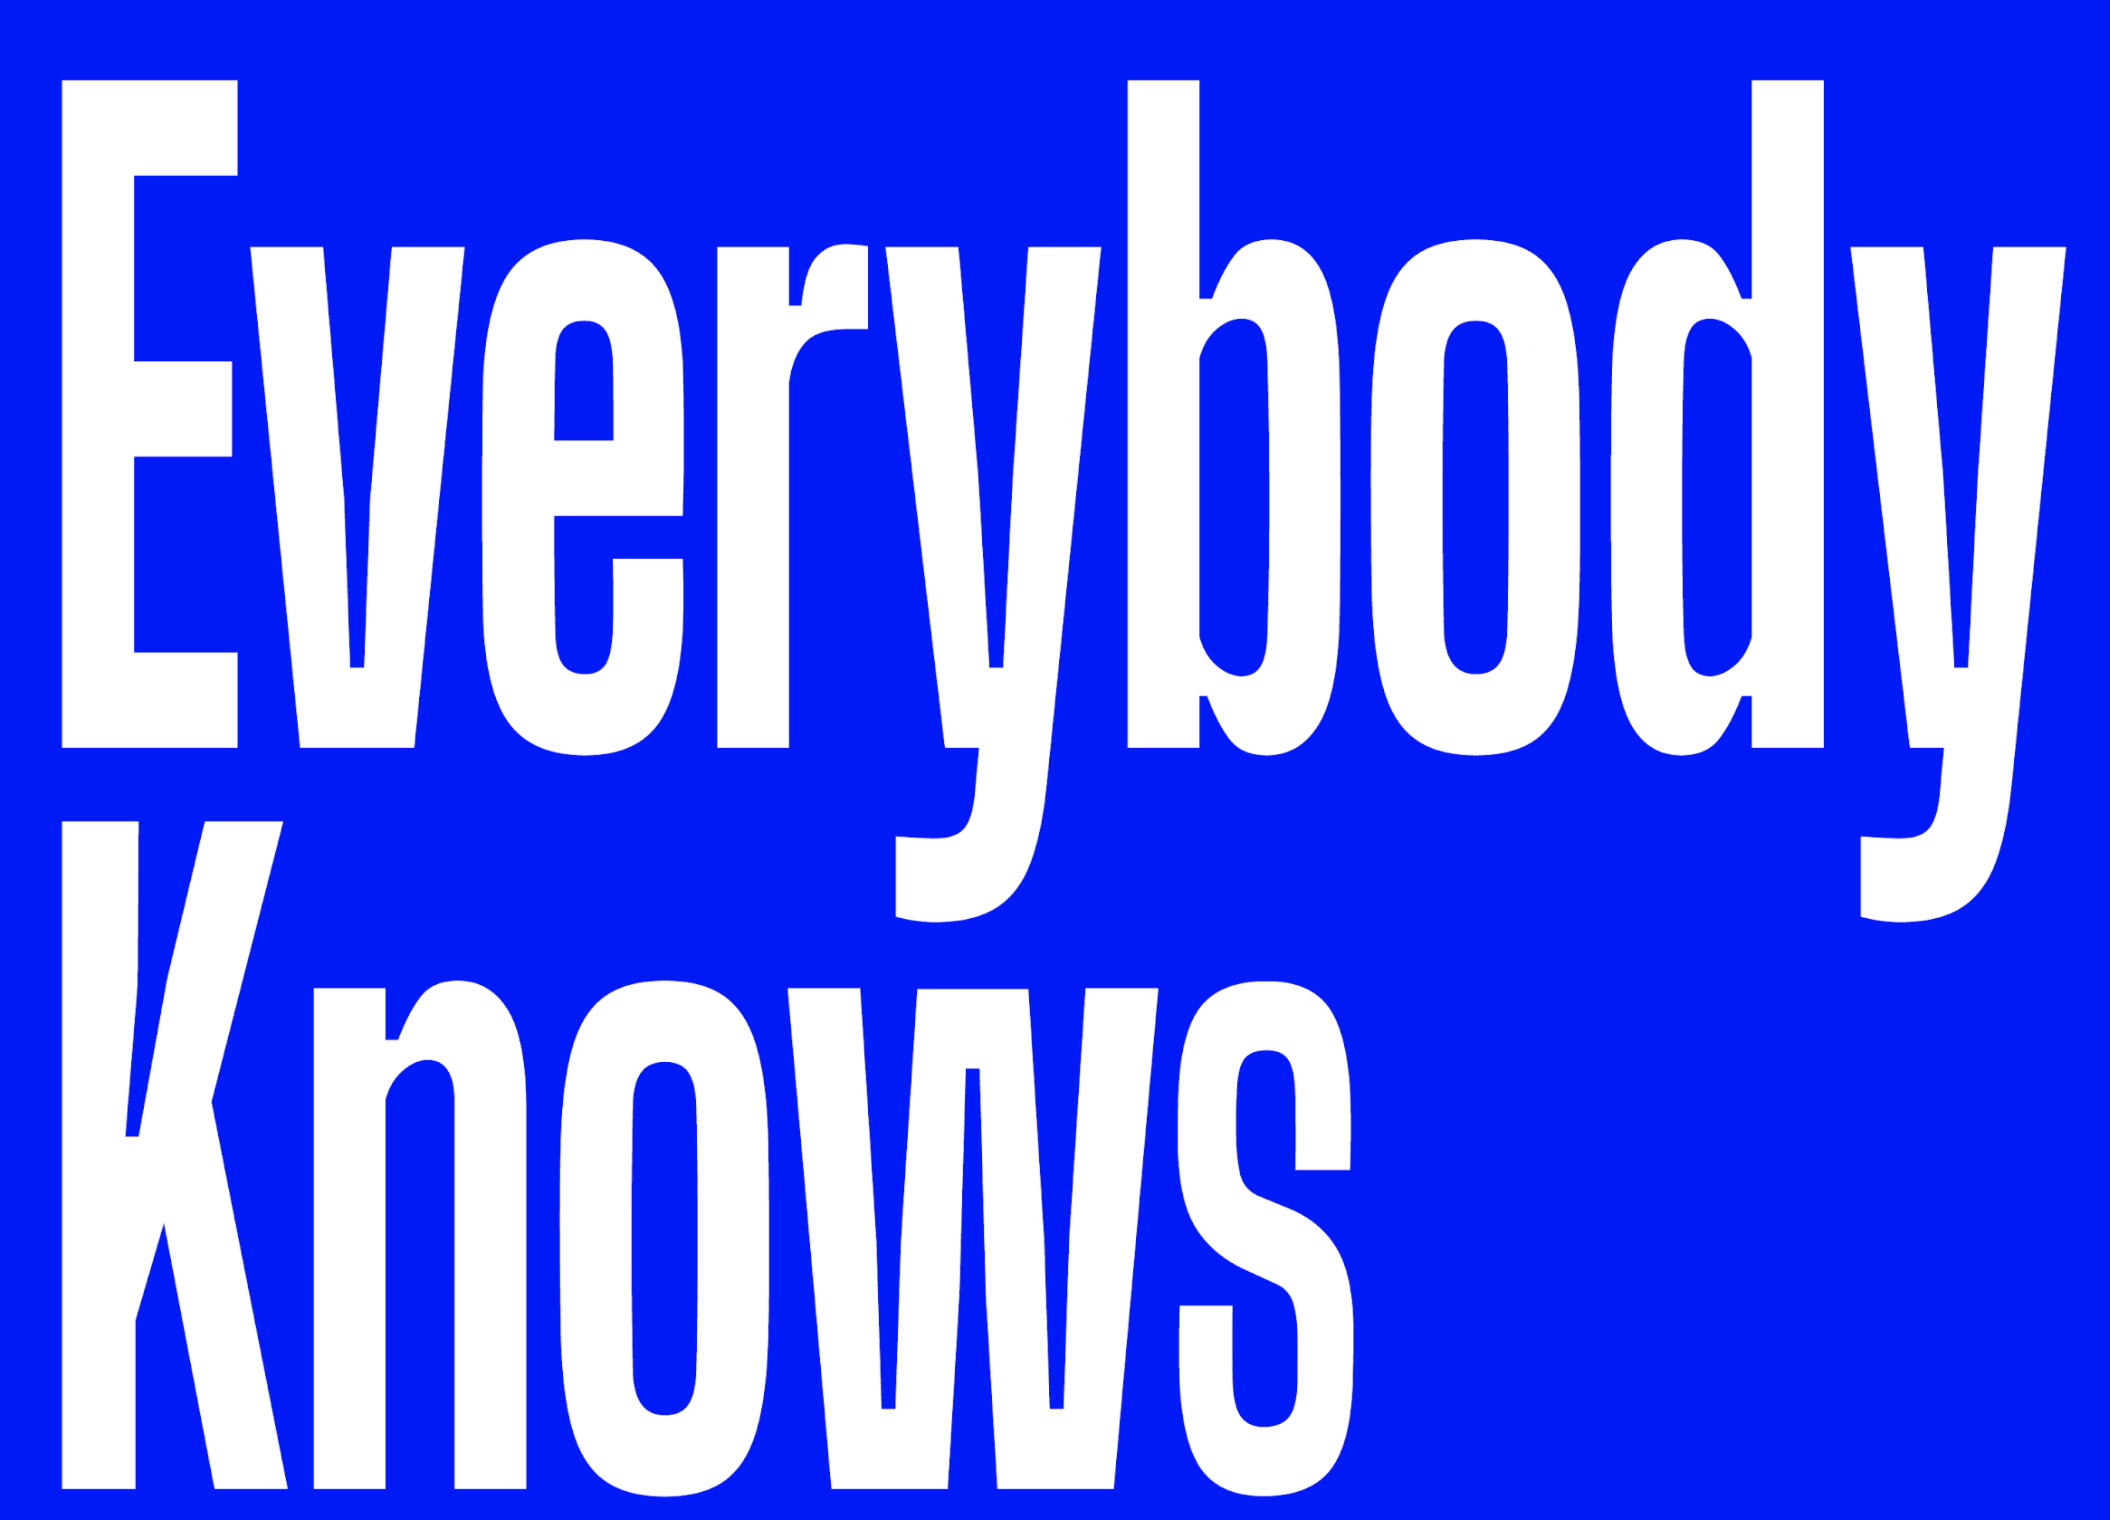 People are listening: Everybody Knows podcast gets over 74,000 downloads in September